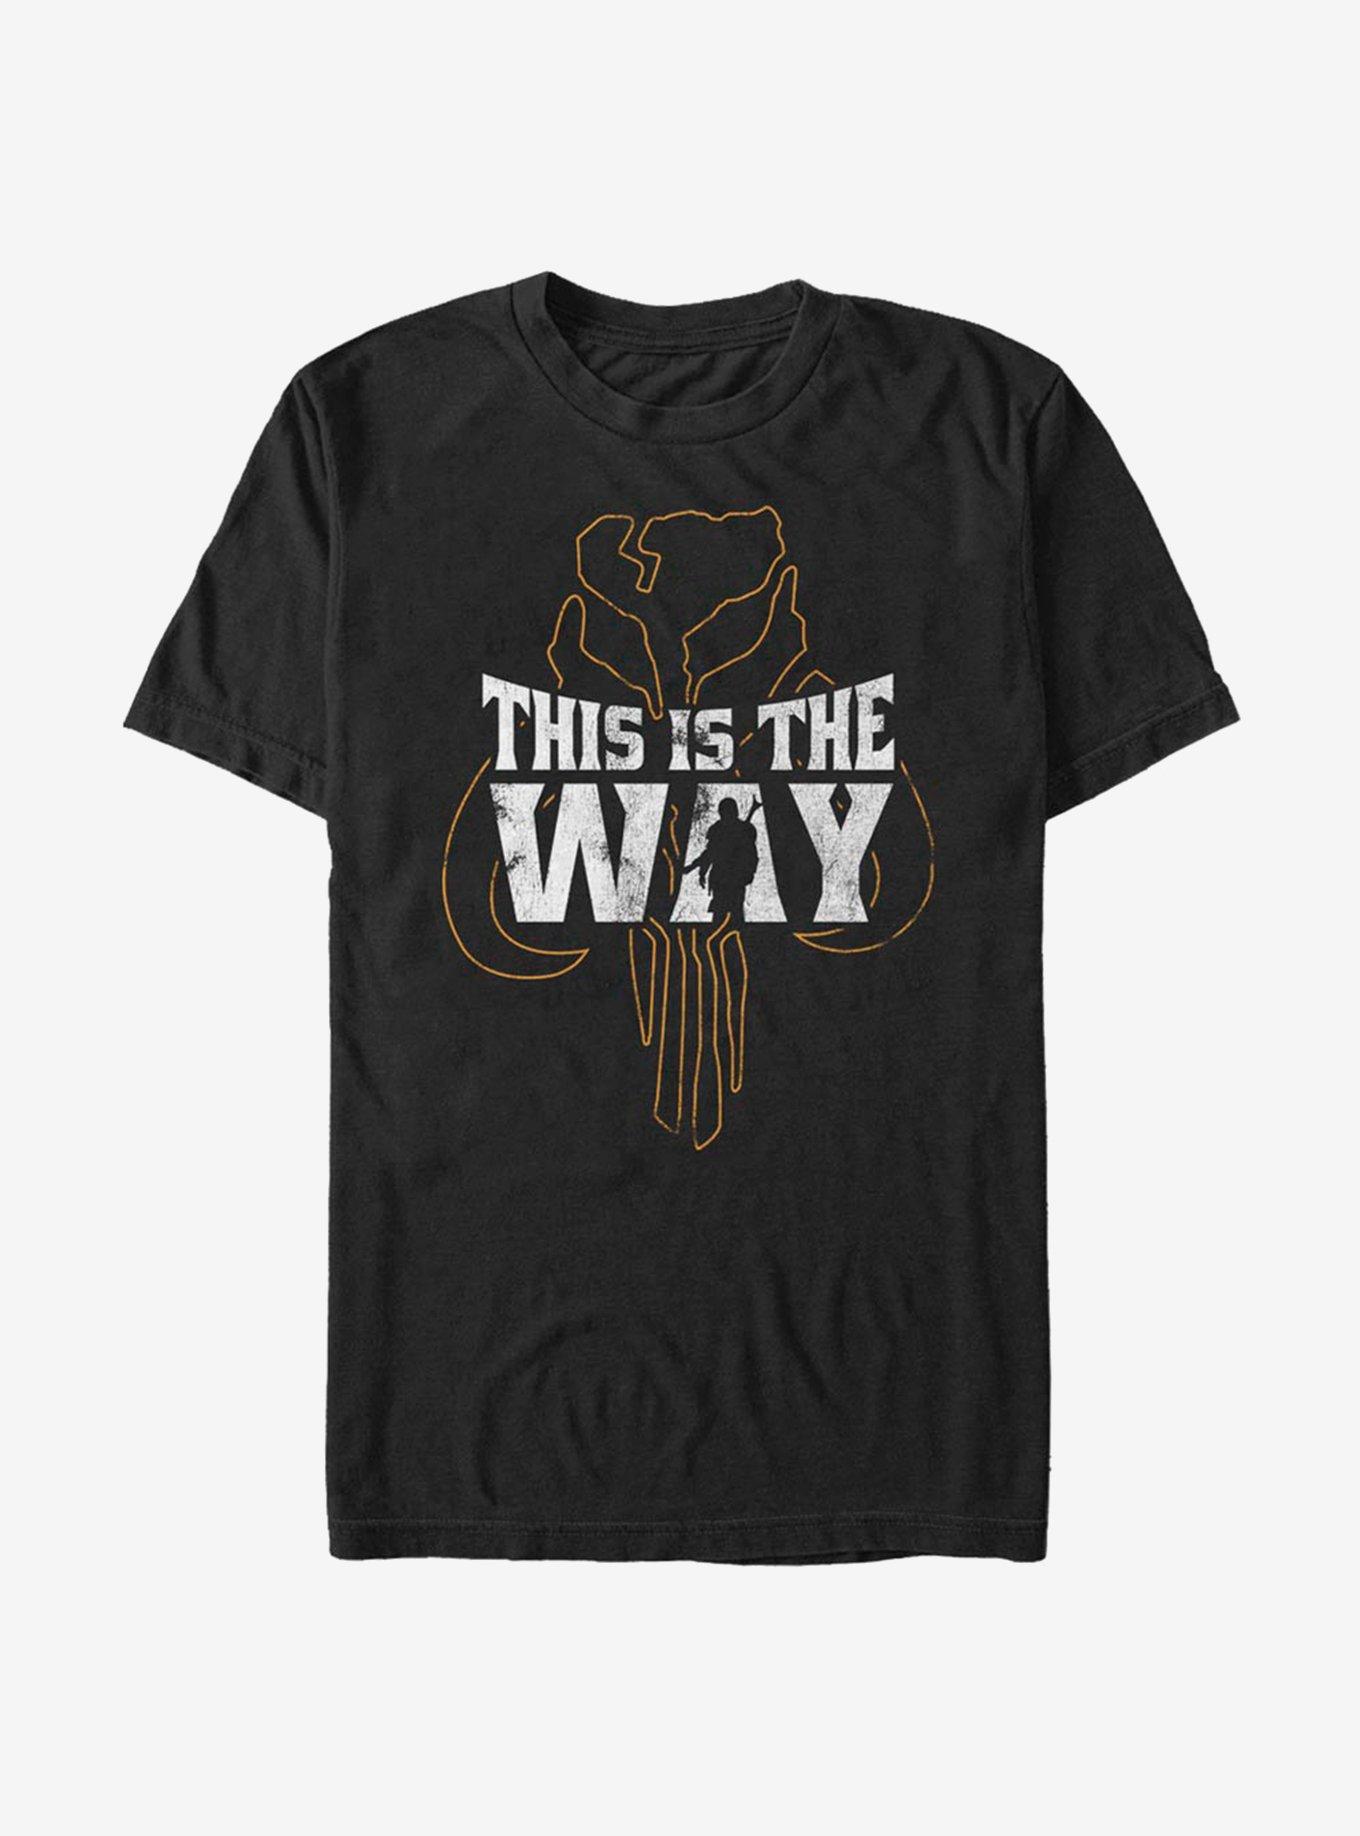 Star Wars The Mandalorian This Is The Way Iron Heart Outline T-Shirt, BLACK, hi-res